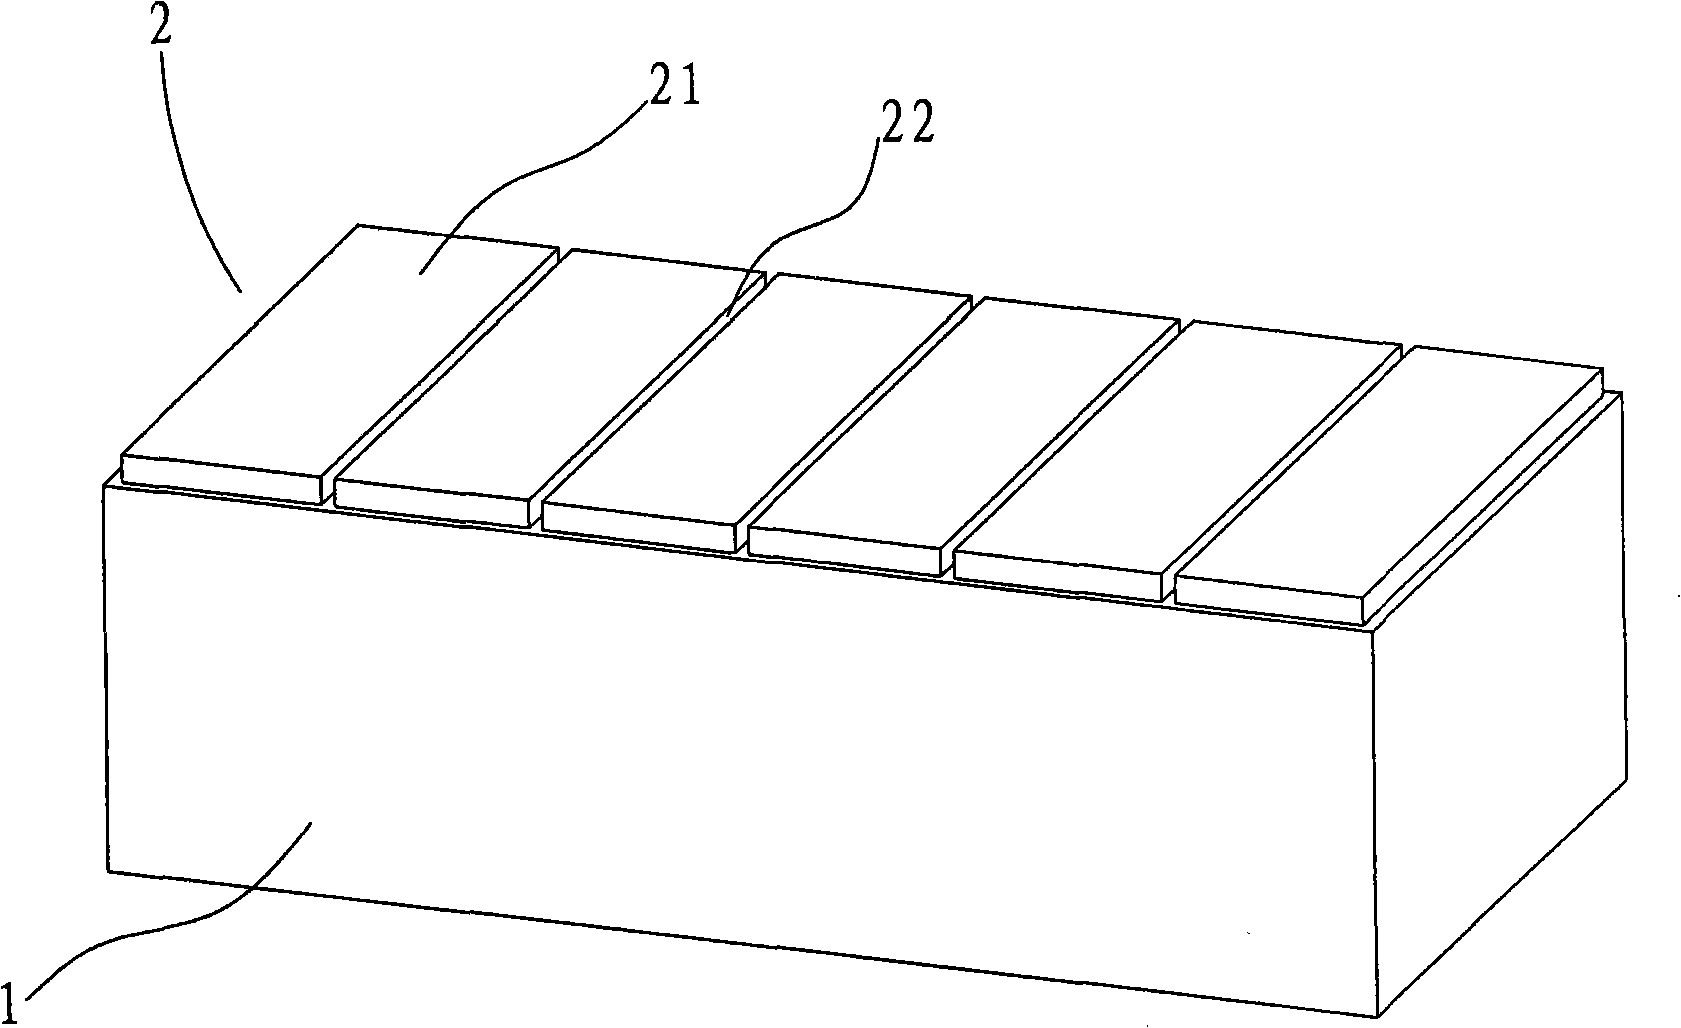 Weak-brightness non-crystal silicon solar cell manufacture method using laser etching transparent electrode